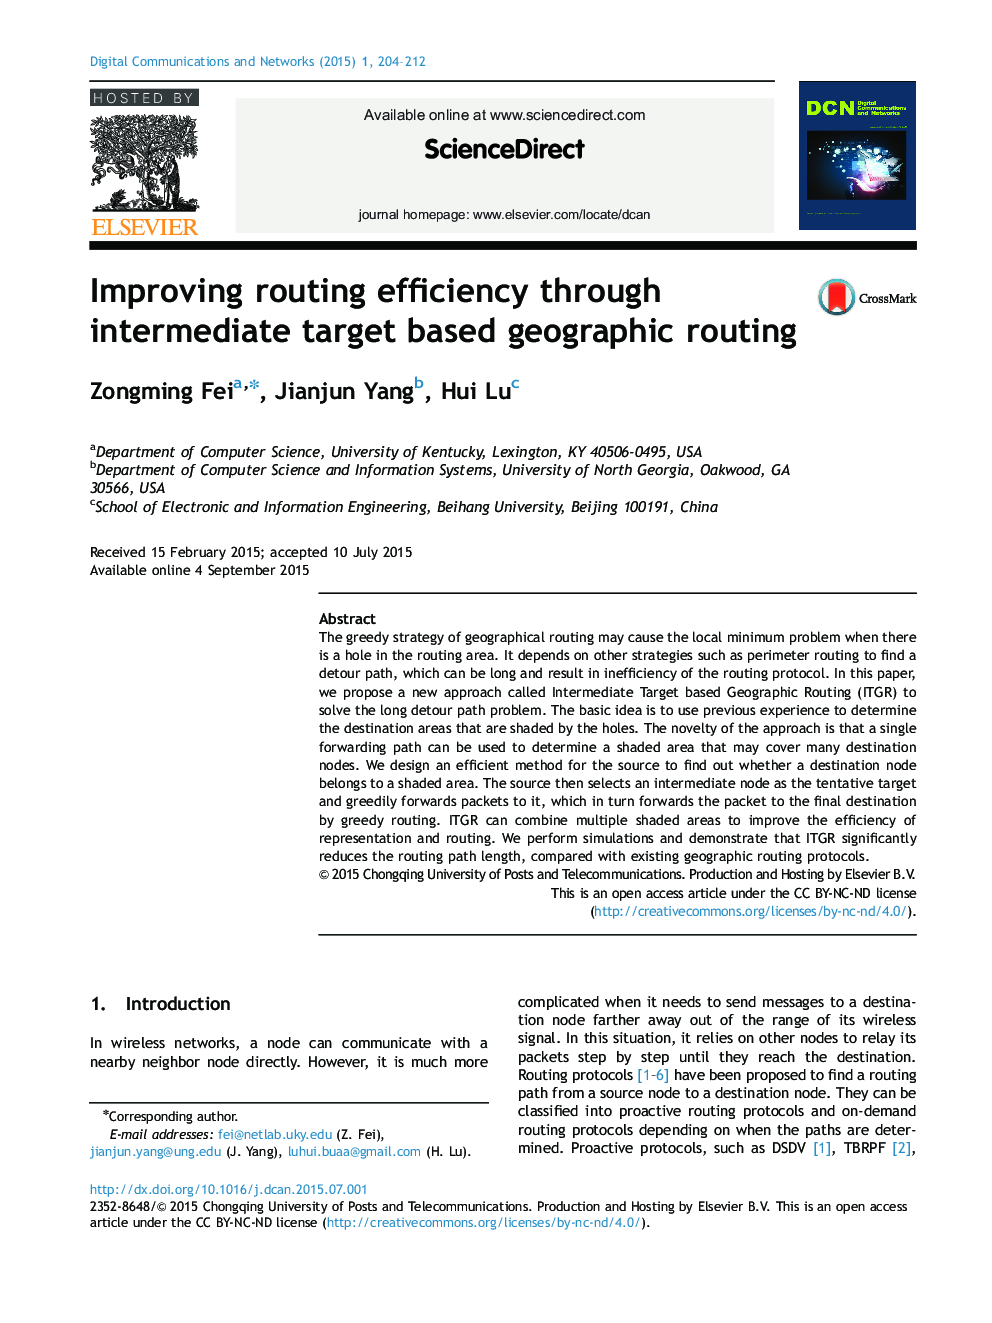 Improving routing efficiency through intermediate target based geographic routing